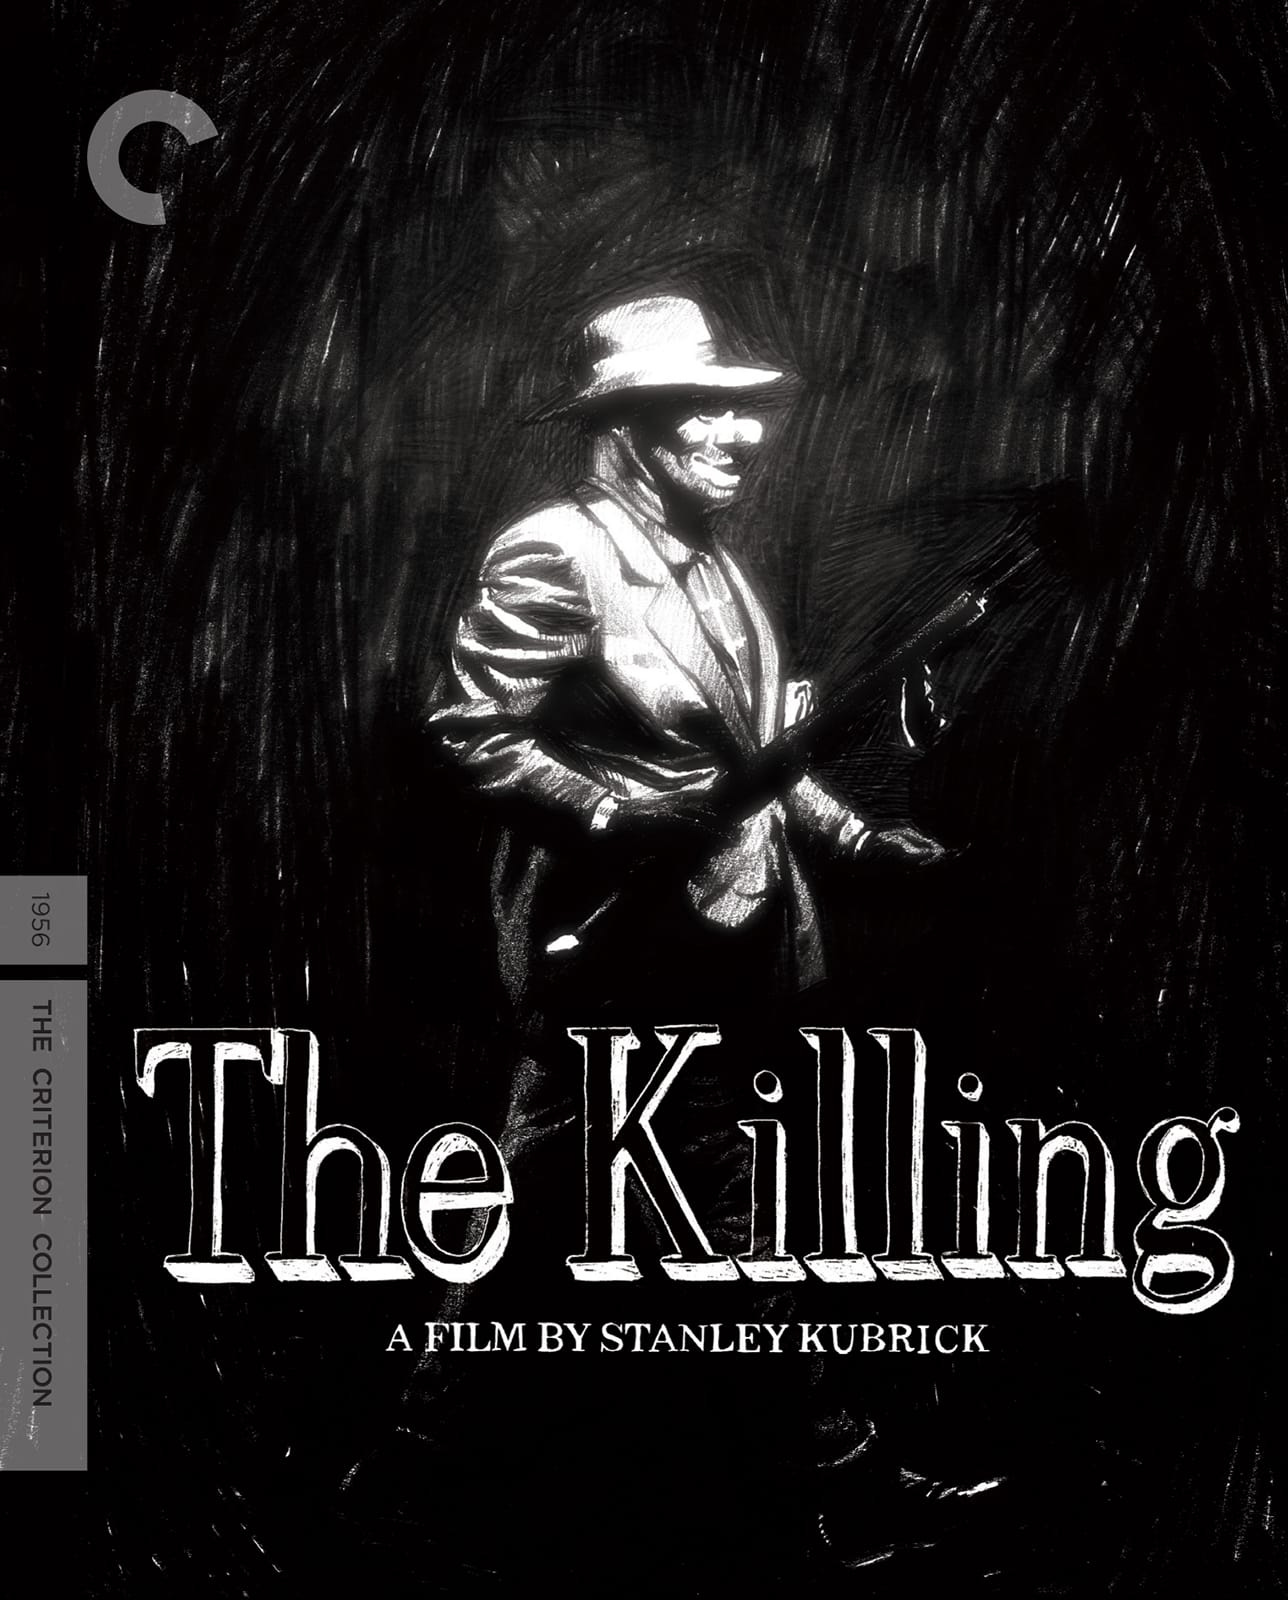 The Killing (1956) | The Criterion Collection